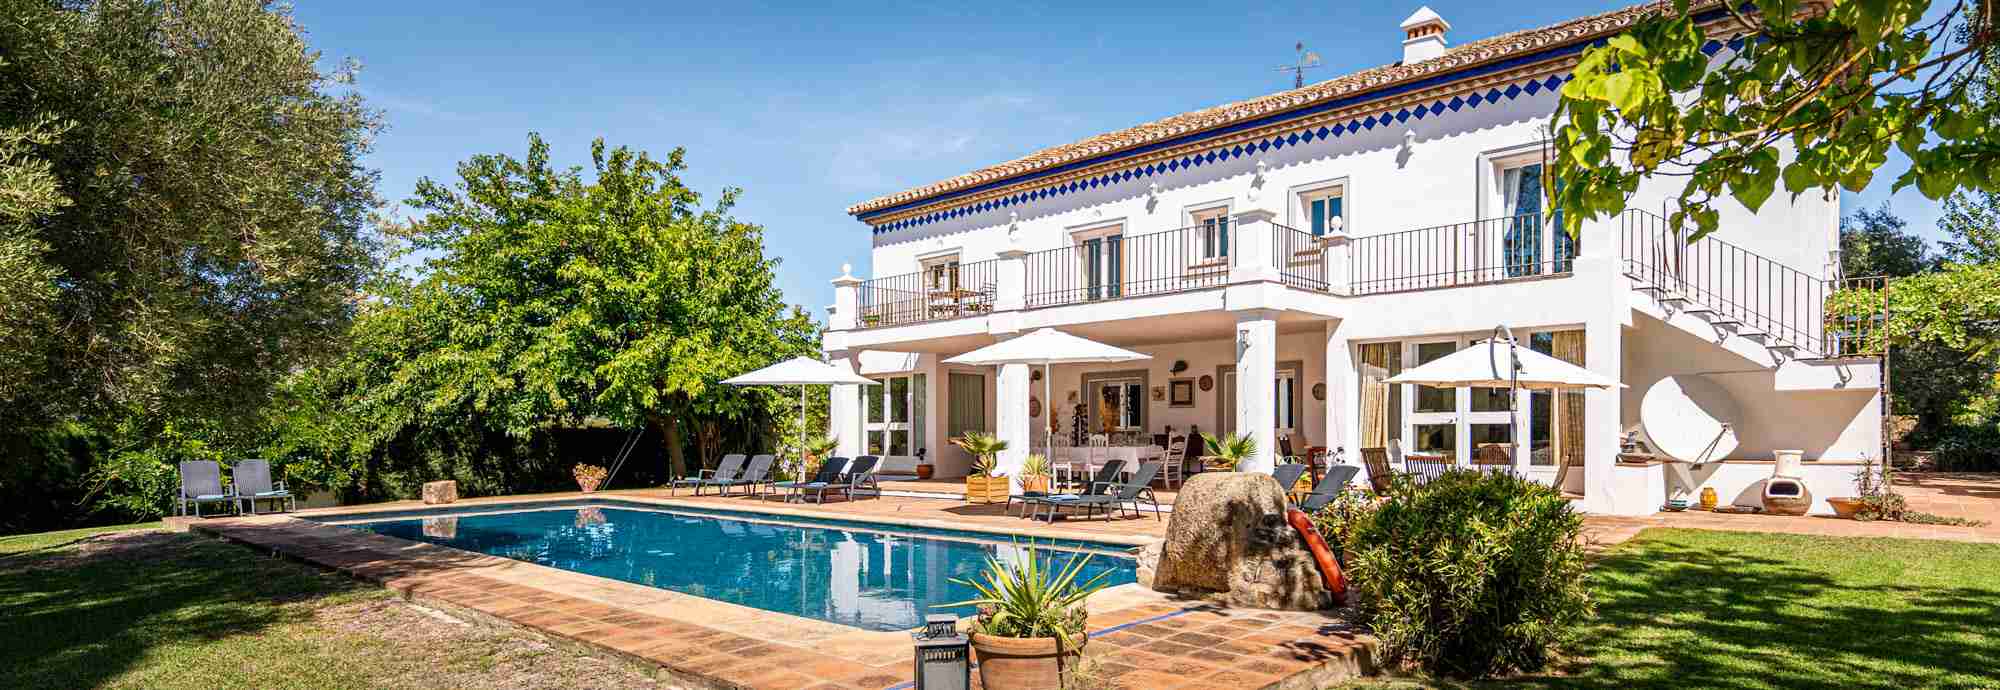 Country house with views, landscaped gardens and 15 metre pool near Ronda 